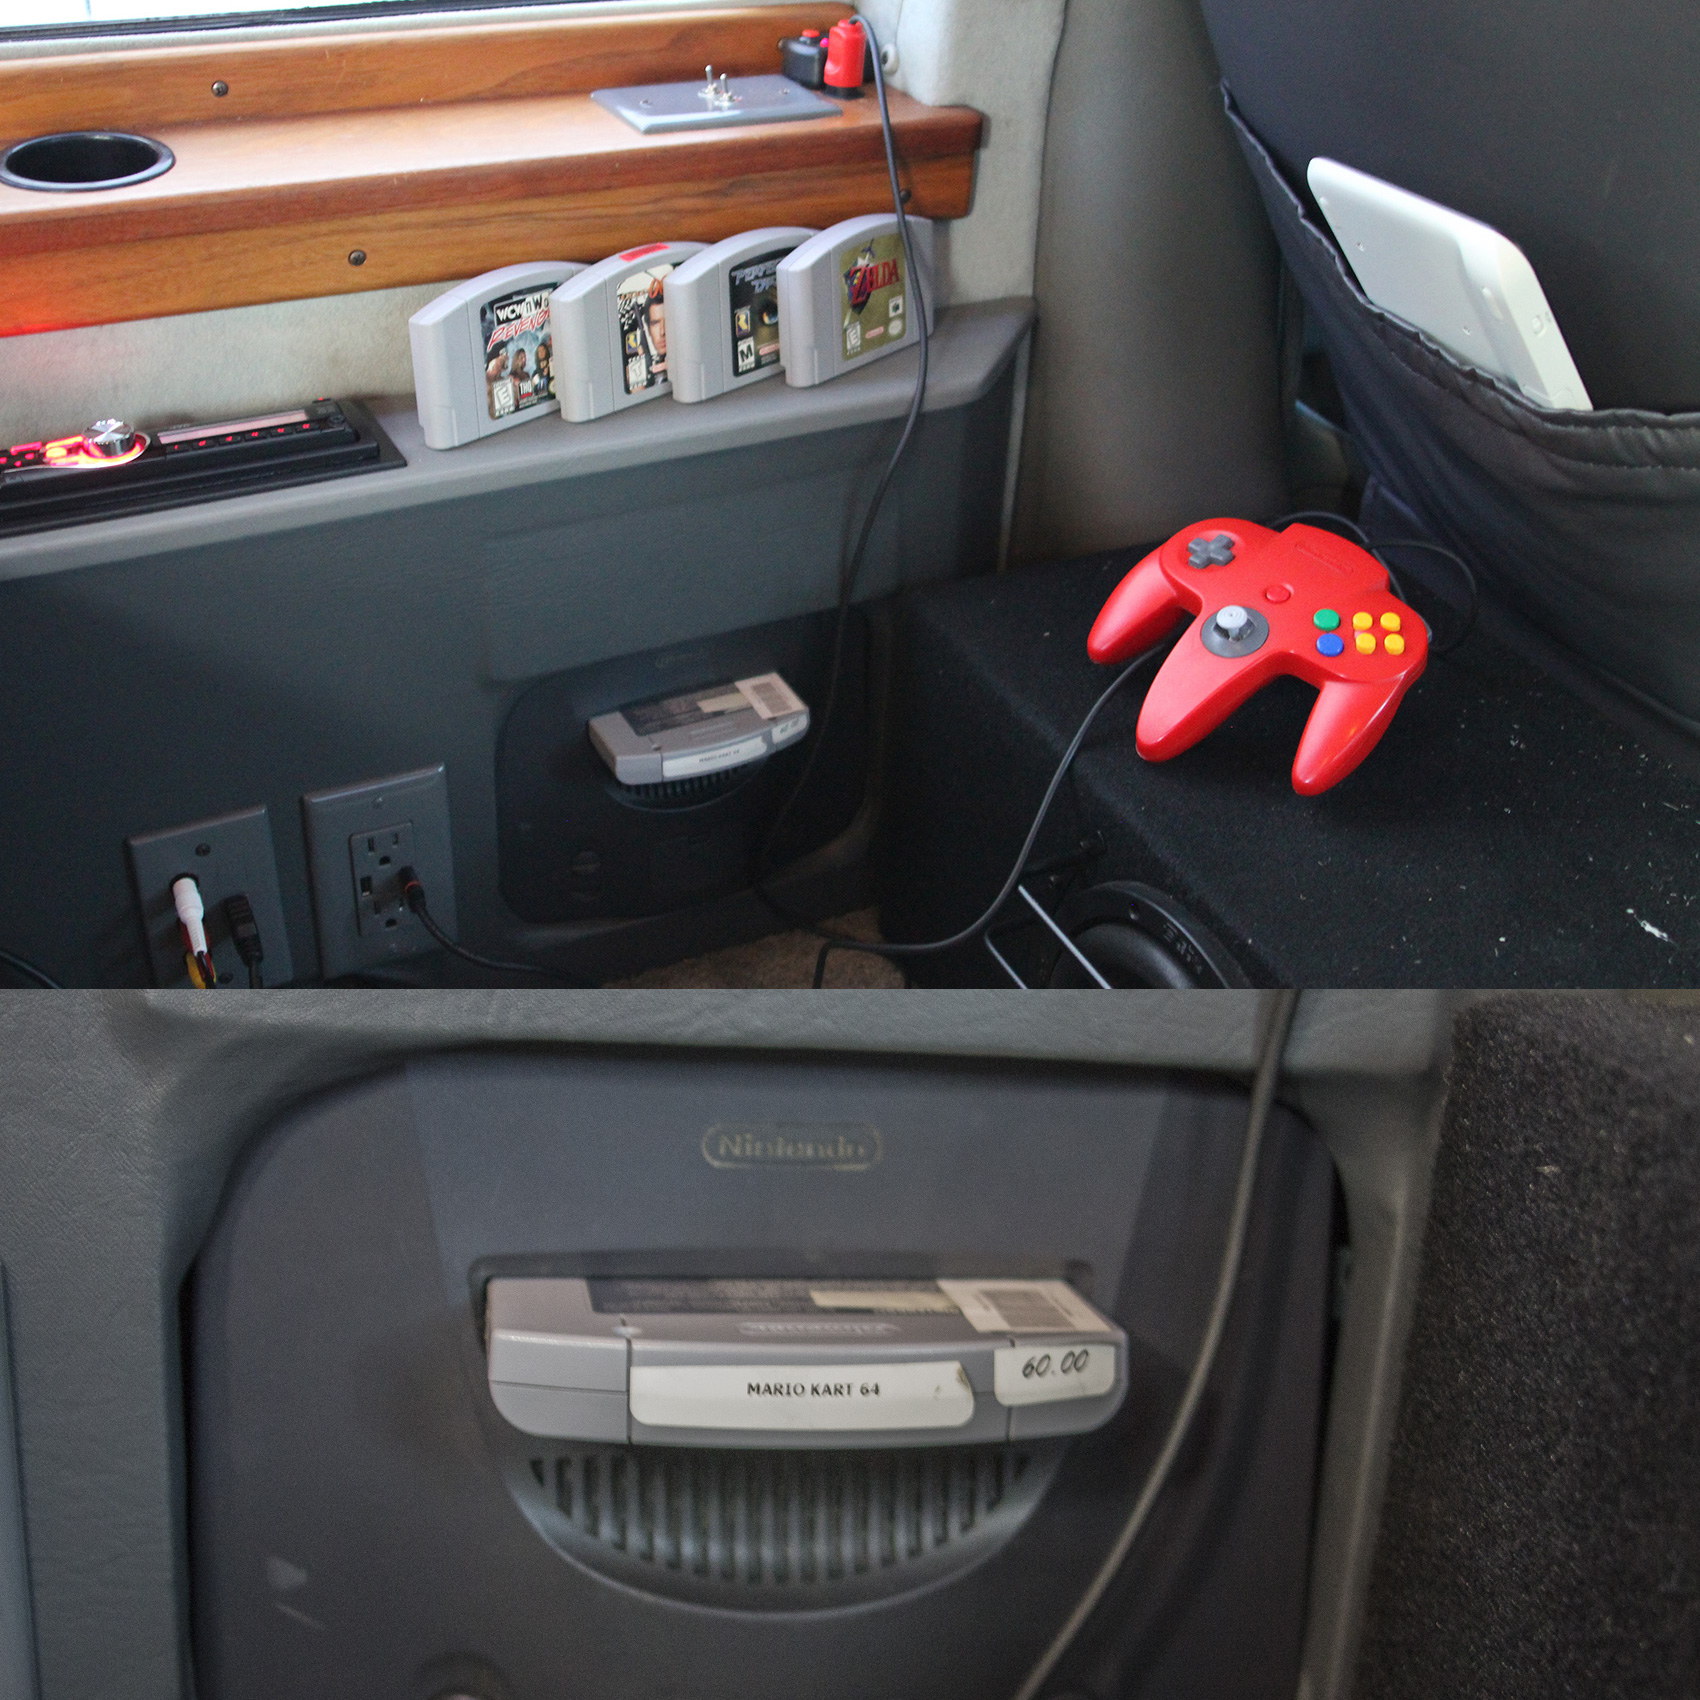 It has a large tv in the back, and two smaller ones up front and it has a Nintendo 64 integrated inside the wall.